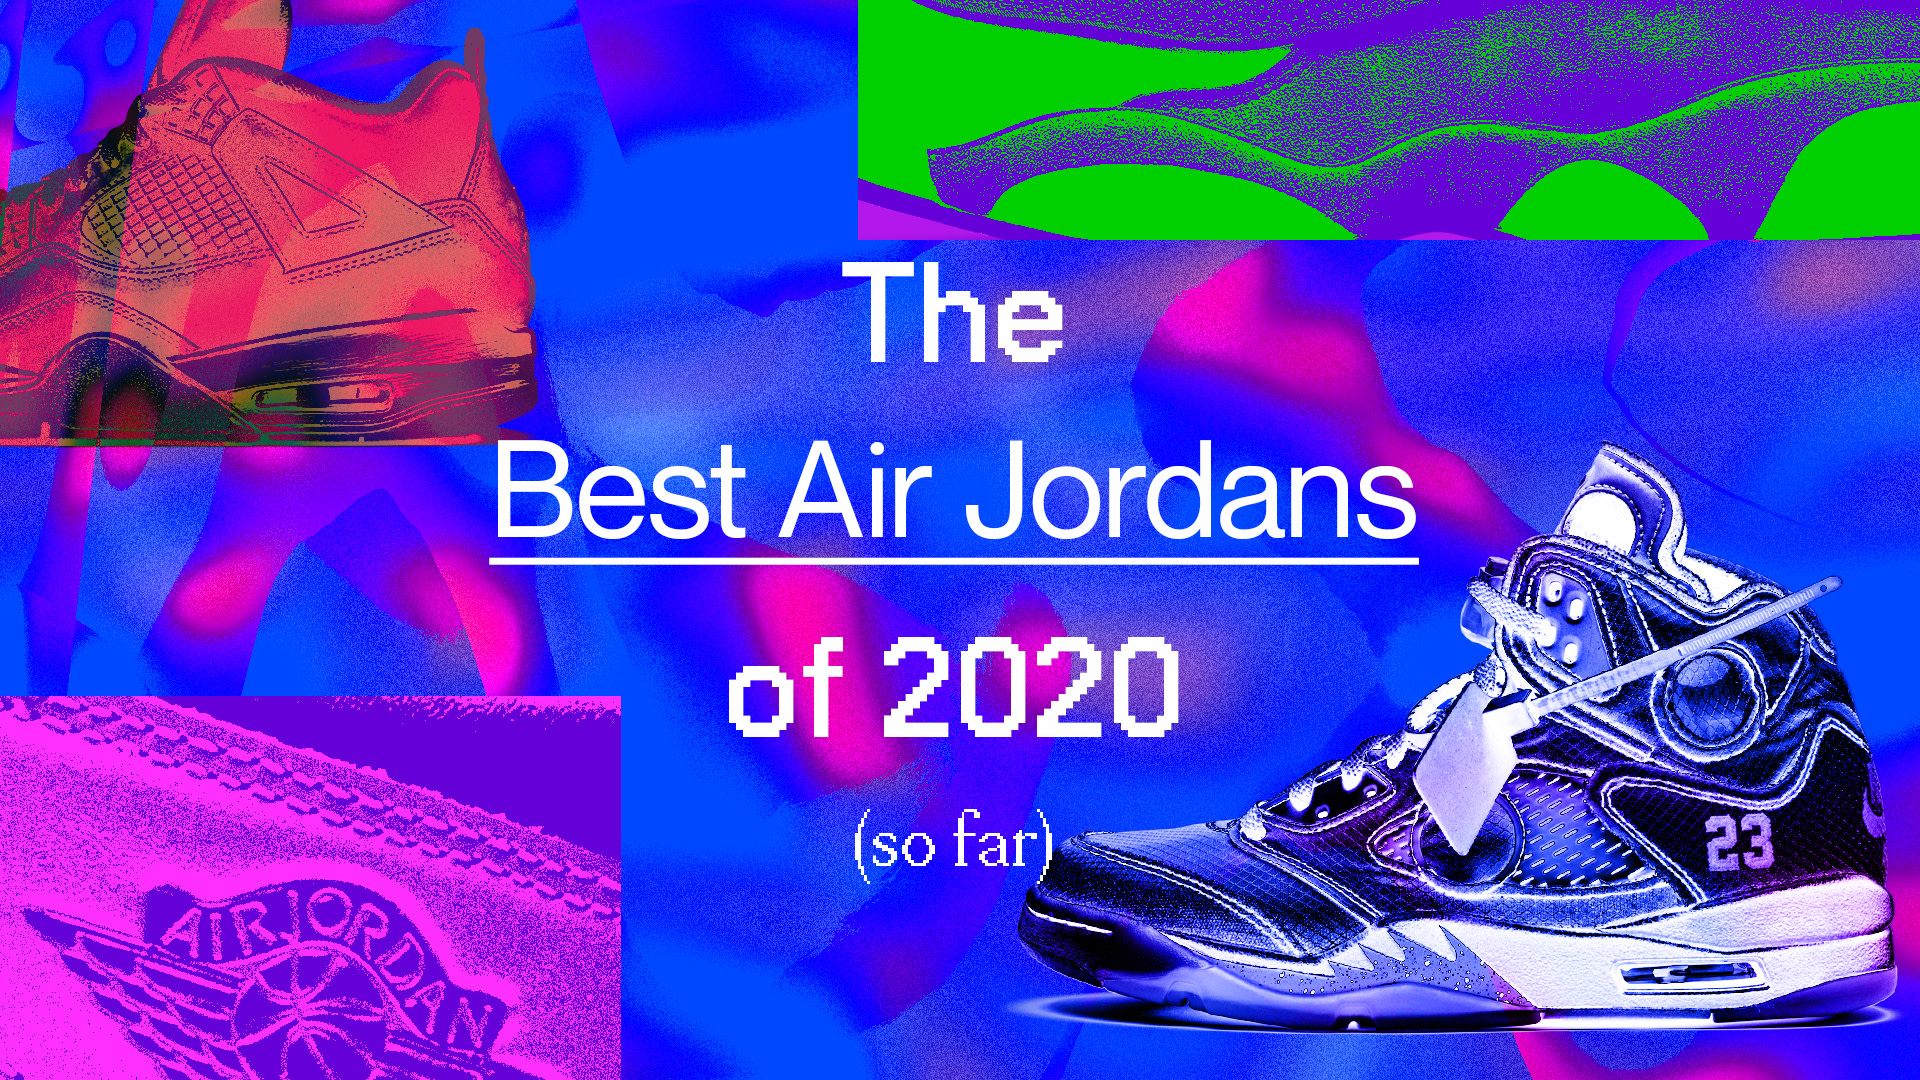 the newest jordans out right now